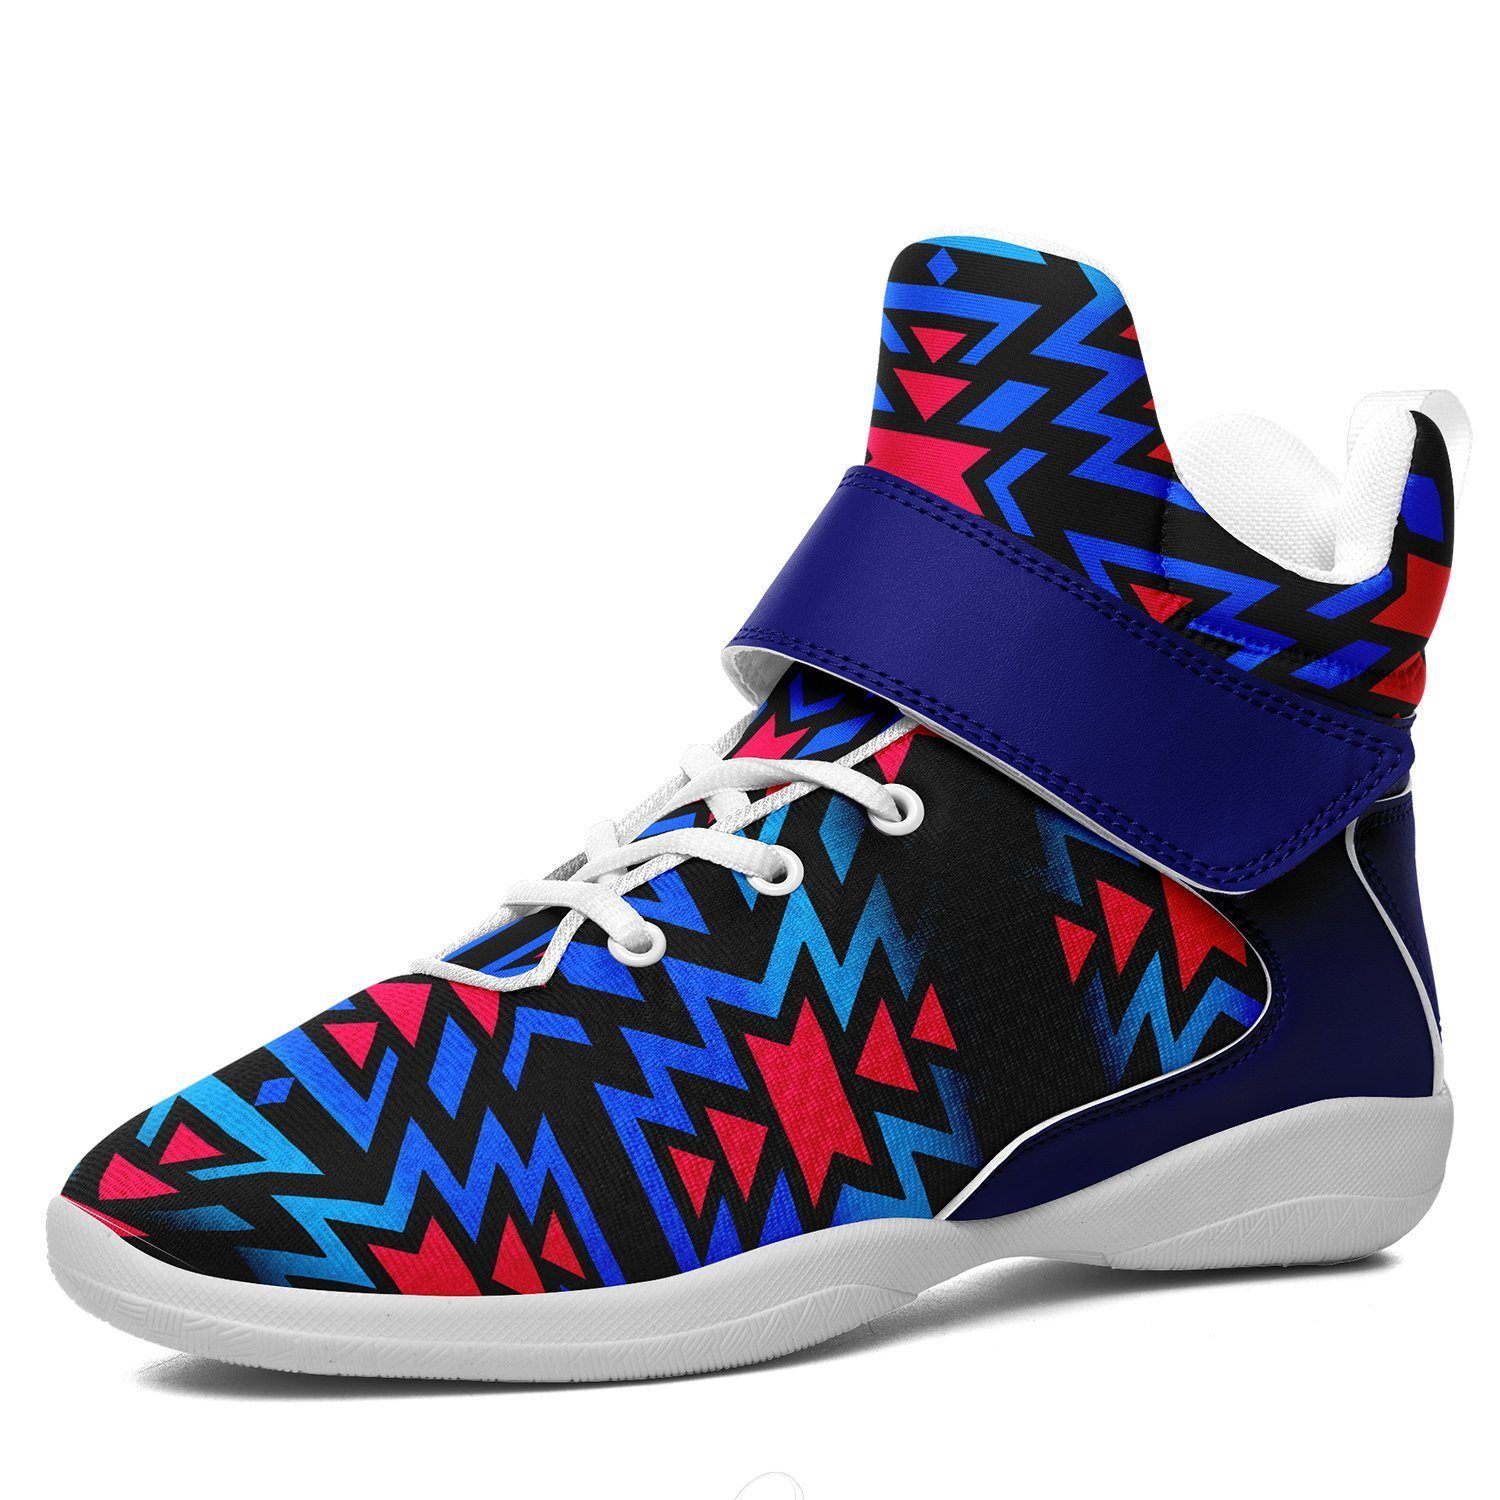 Black Fire Dragonfly Ipottaa Basketball / Sport High Top Shoes - White Sole 49 Dzine US Men 7 / EUR 40 White Sole with Blue Strap 